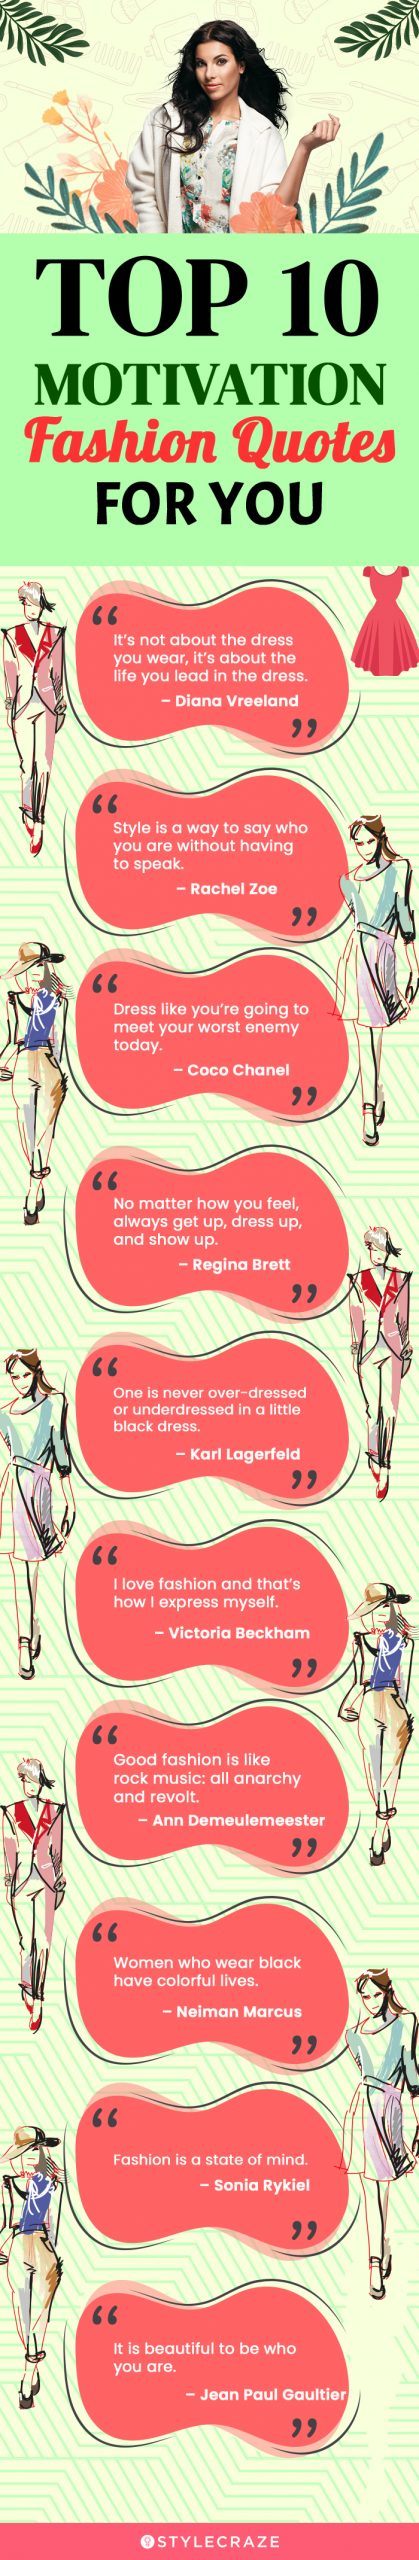 top 10 motivational fashion quotes for you (infographic)